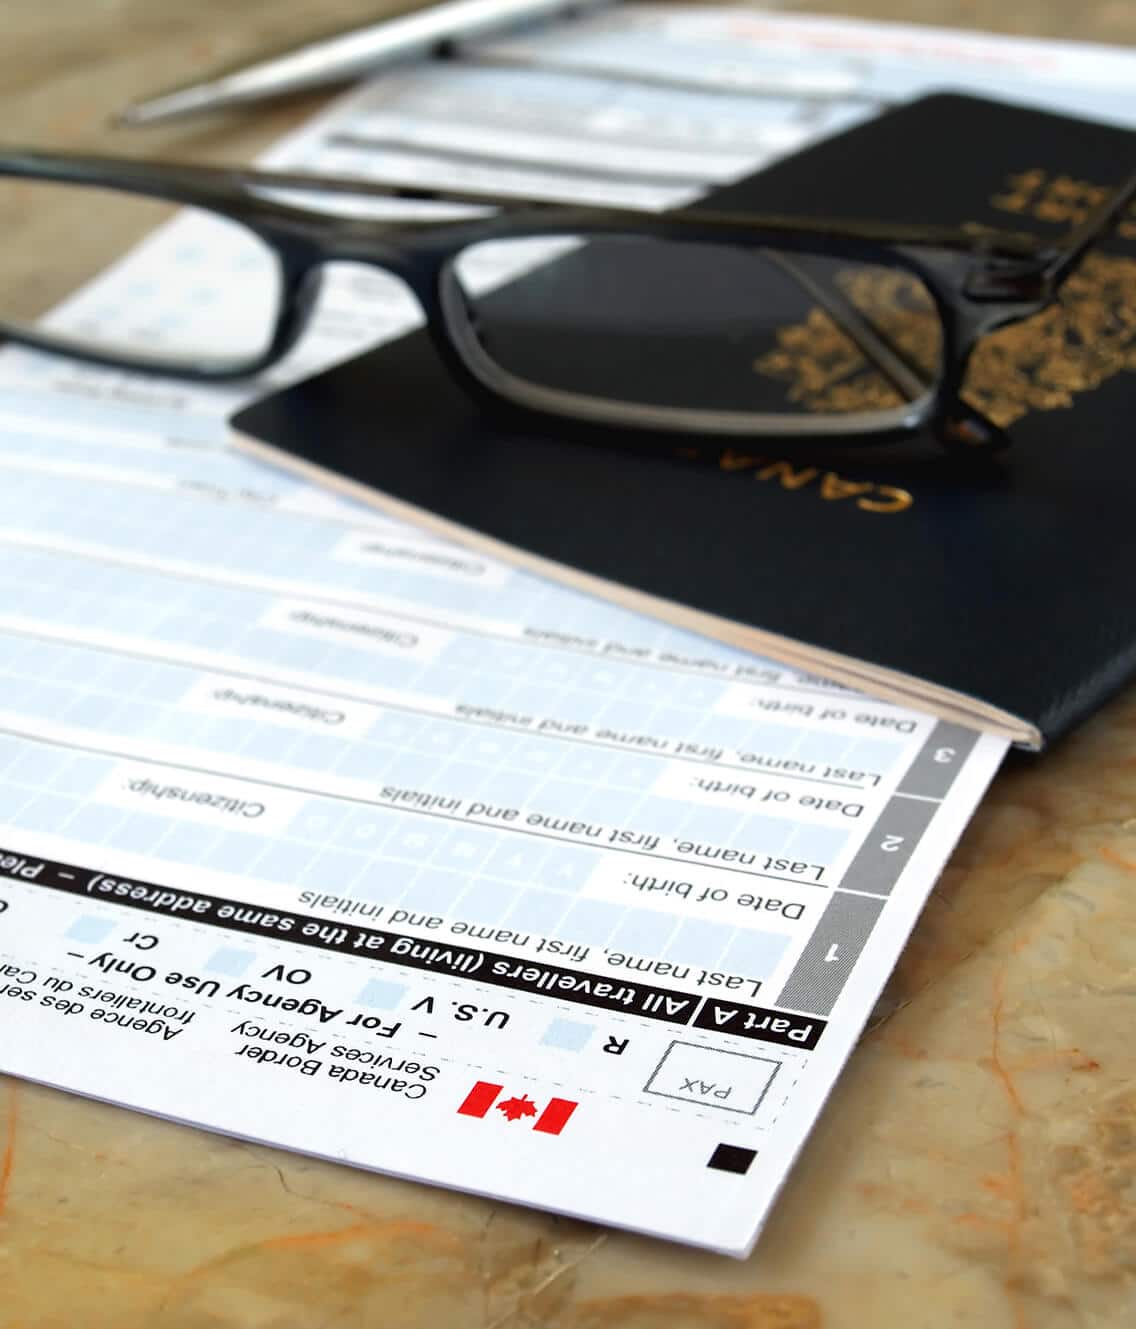 Immigration documents folded in Canadian passport under glasses